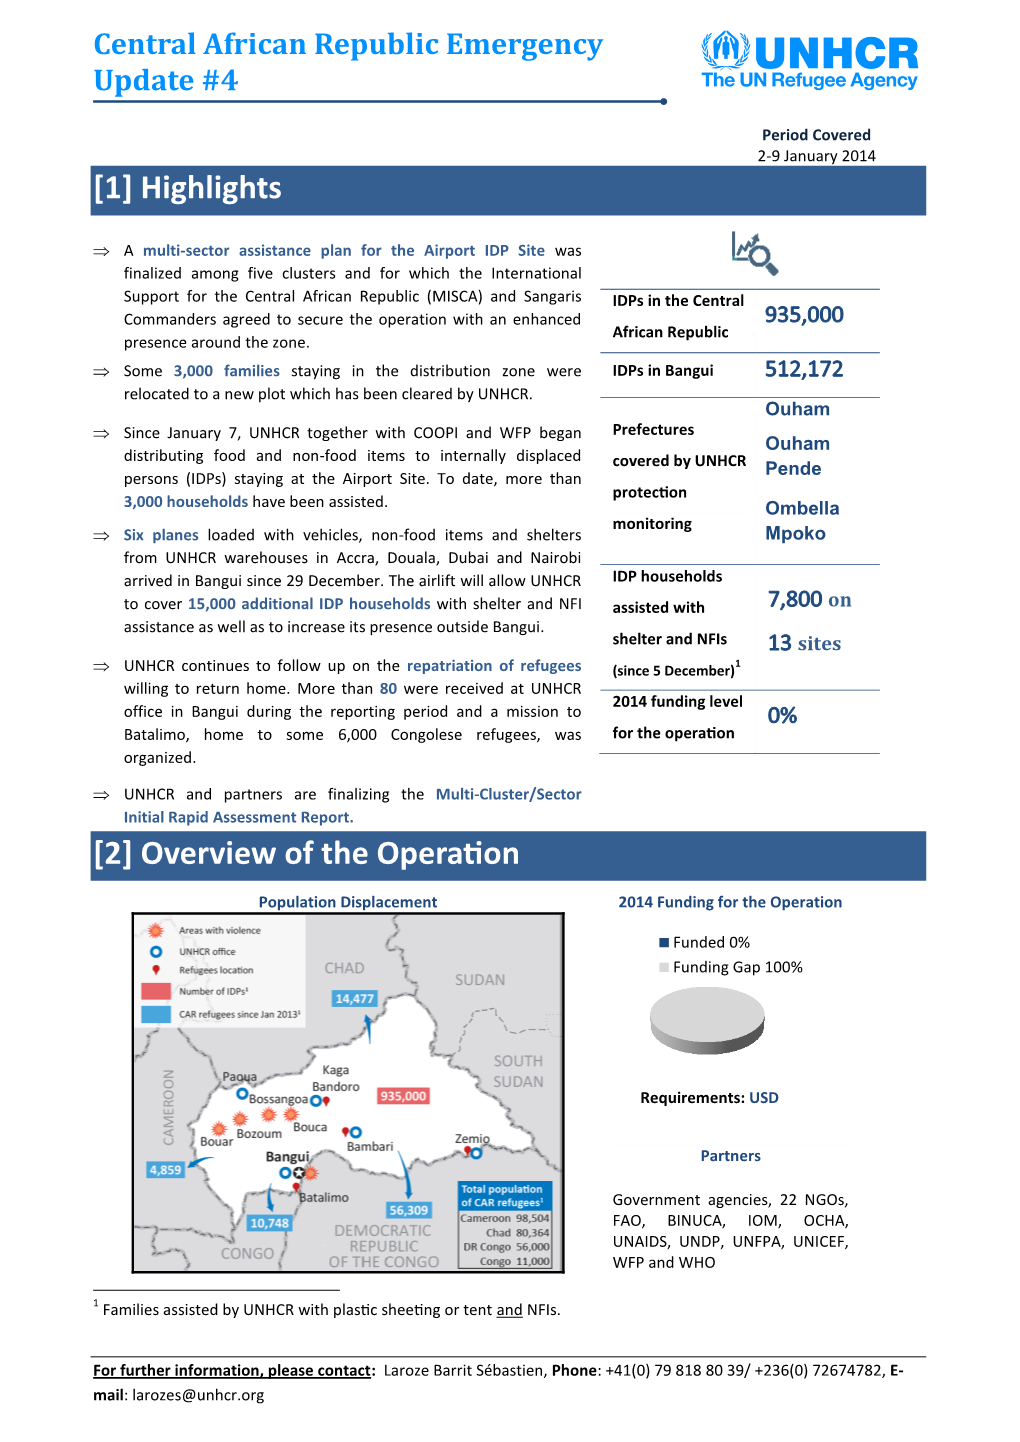 Central African Republic Emergency Update #4